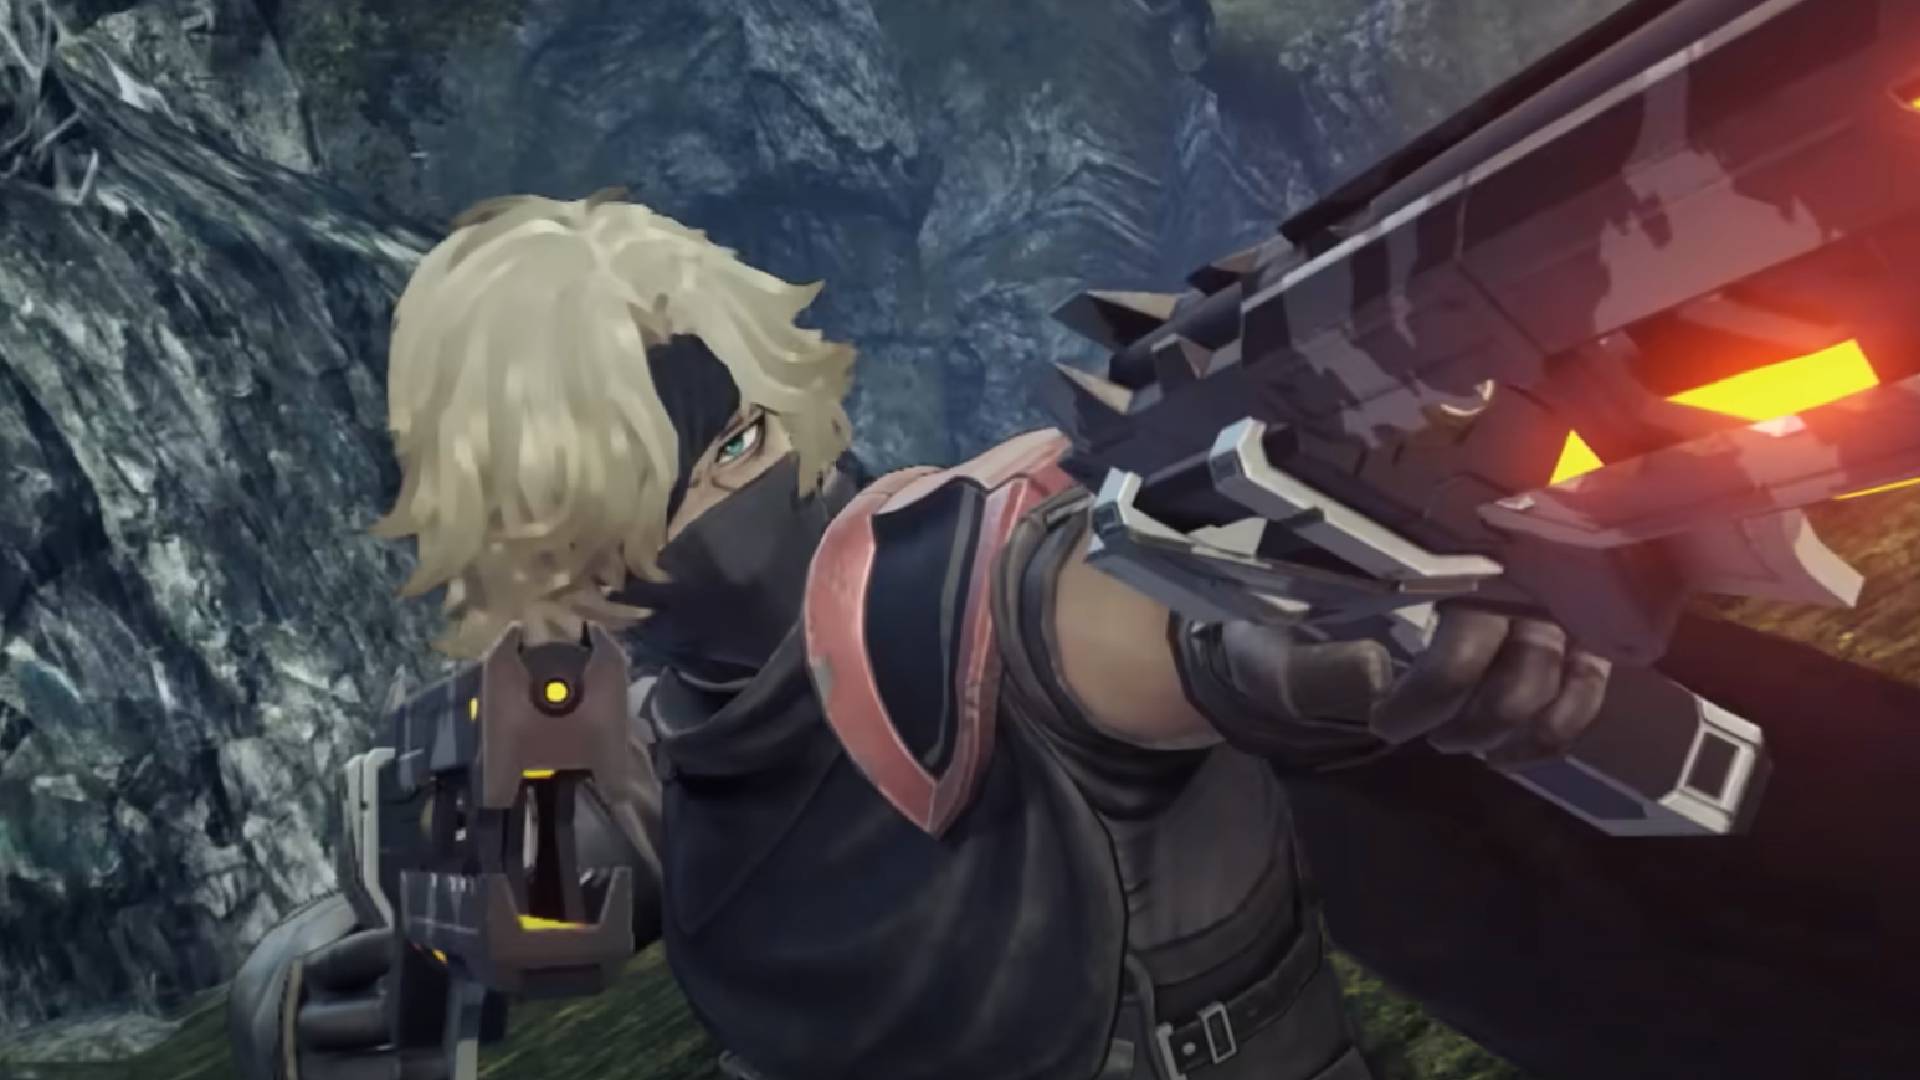 Xenoblade Chronicles 3: How to unlock all Heroes